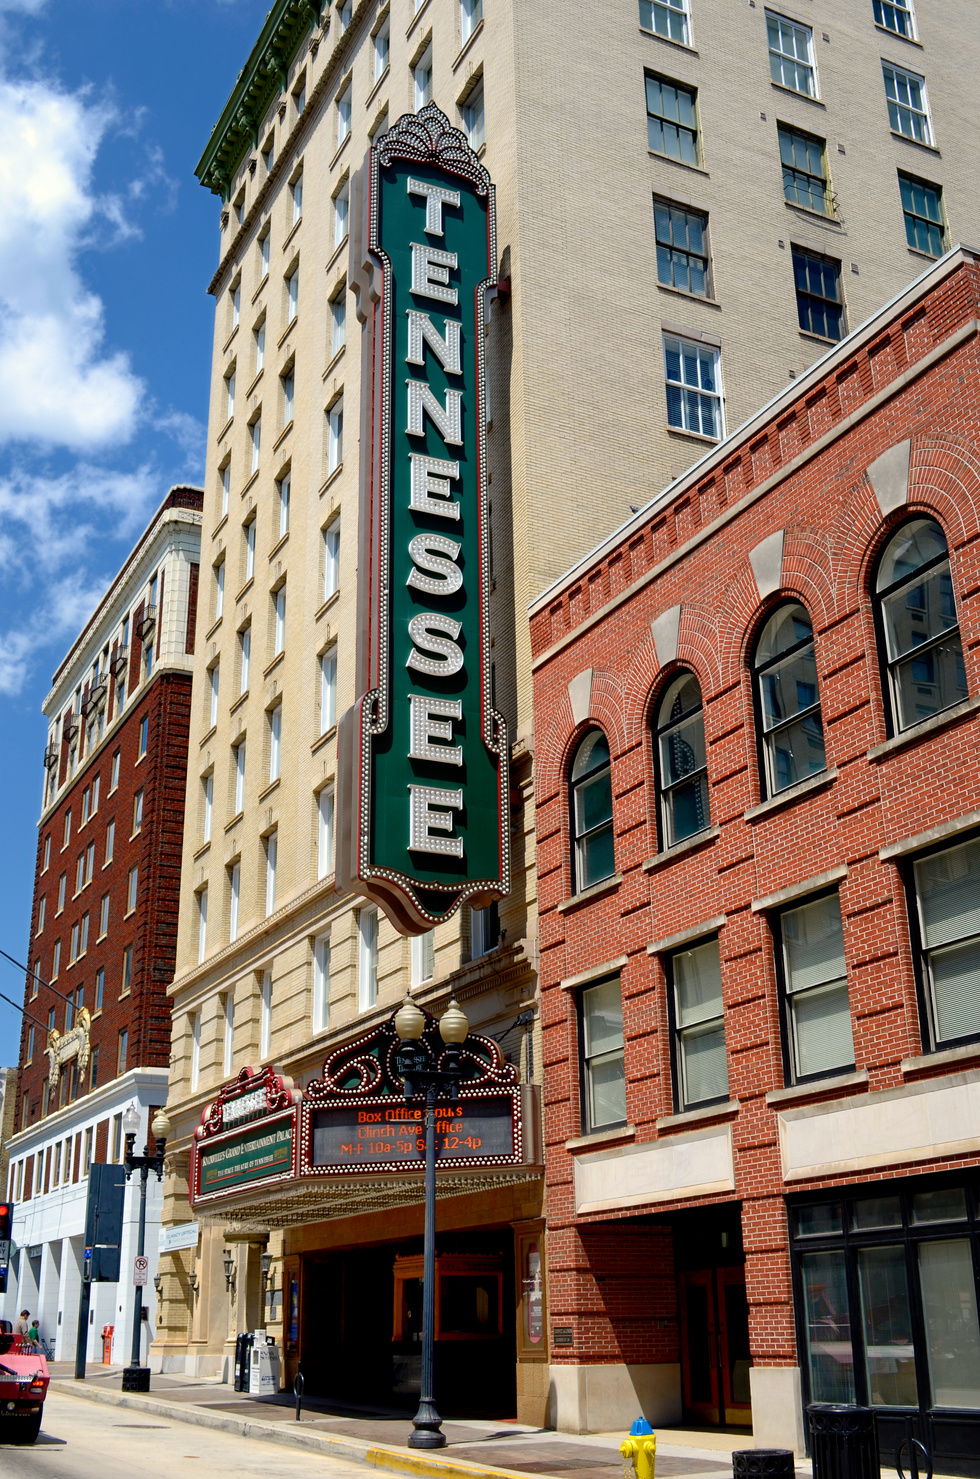 Historic Tennessee Theater on Gay Street, Knoxville, TN USA